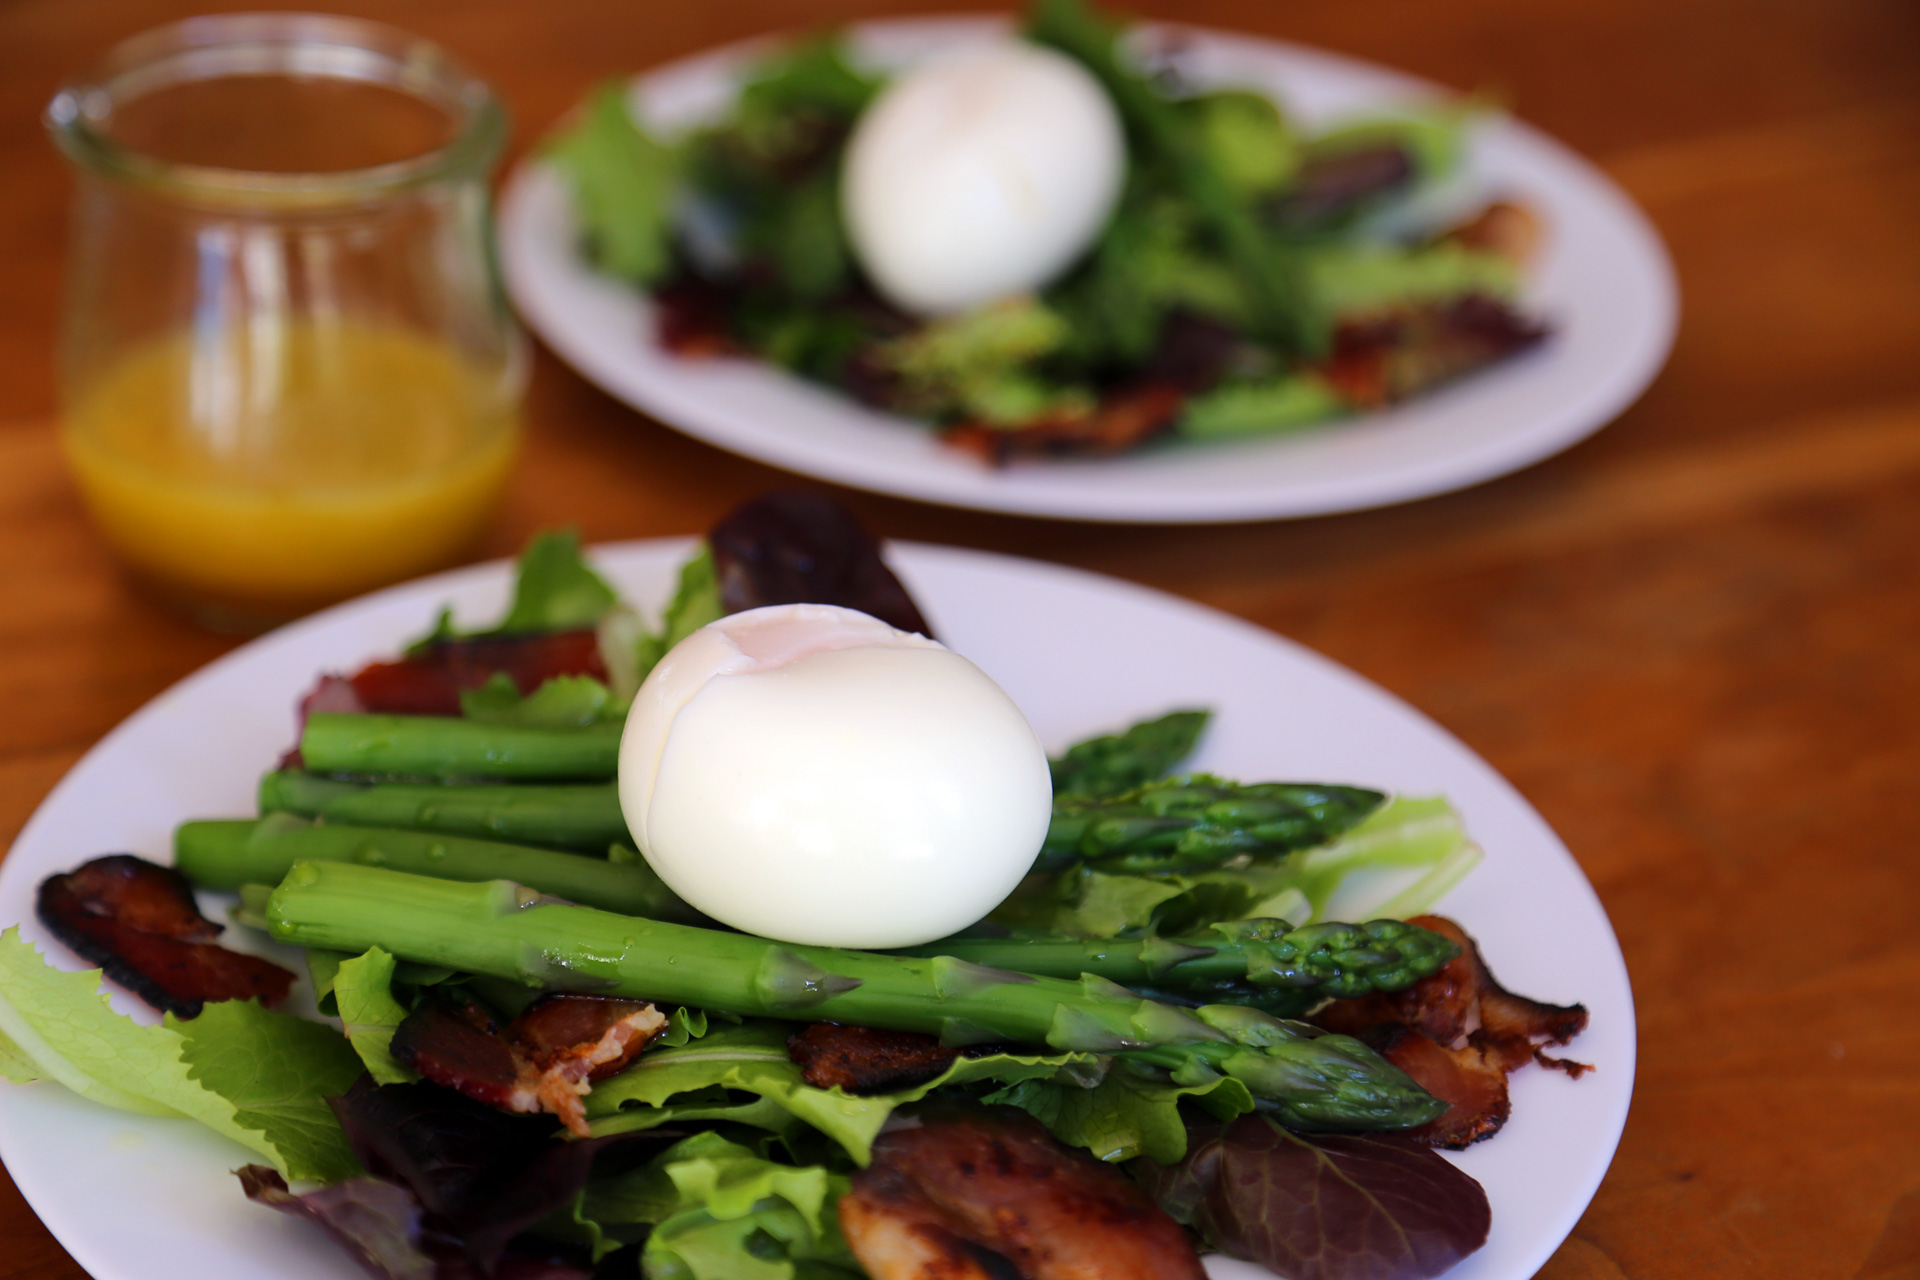 Toss to coat with vinaigrette, then divide between individual plates. Place an egg on each salad.